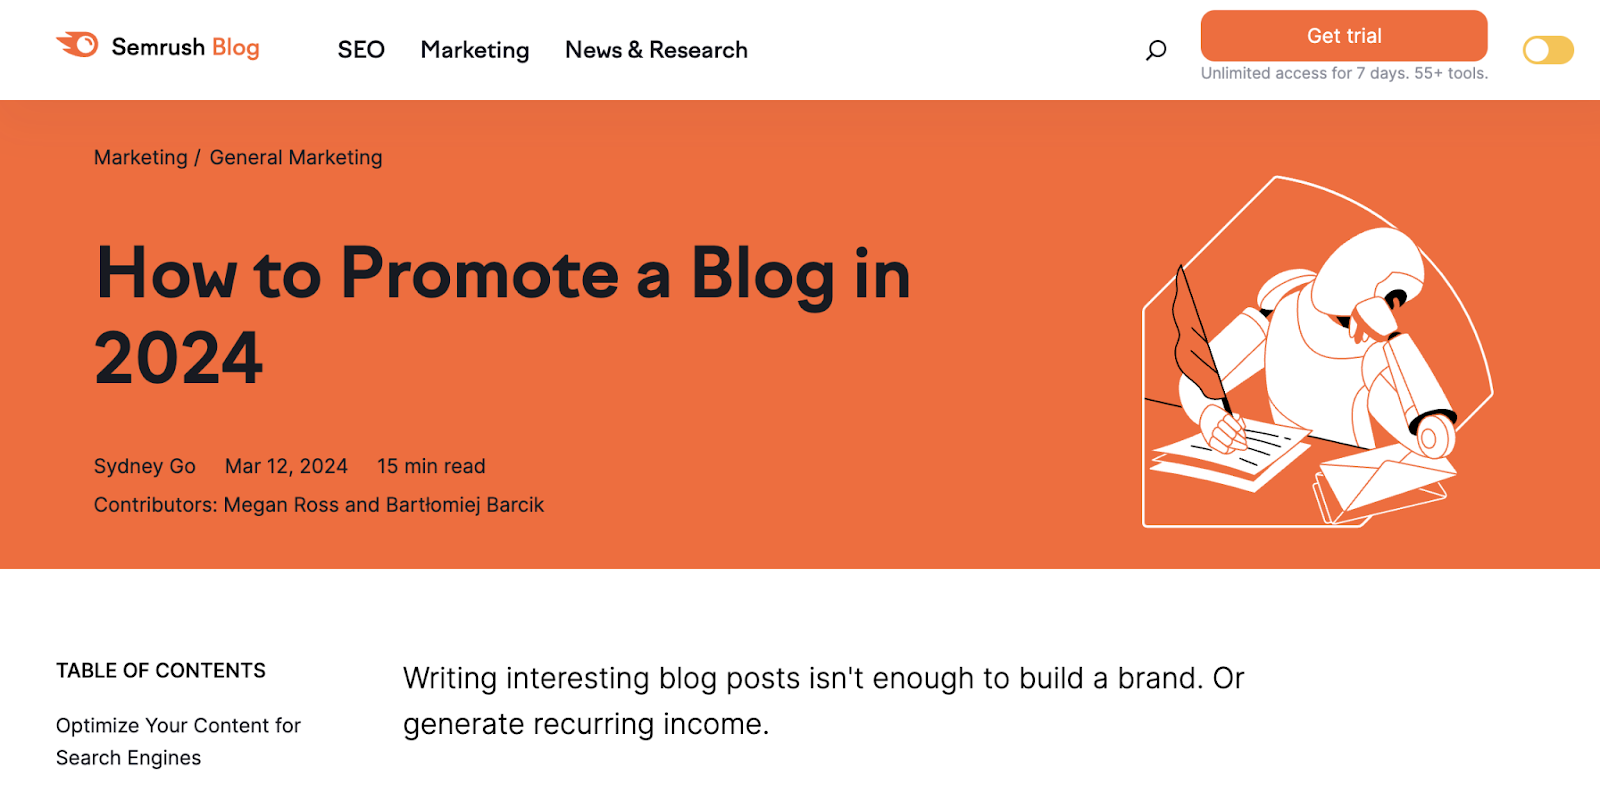 Semrush's blog title "How to Promote a Blog in 2024"